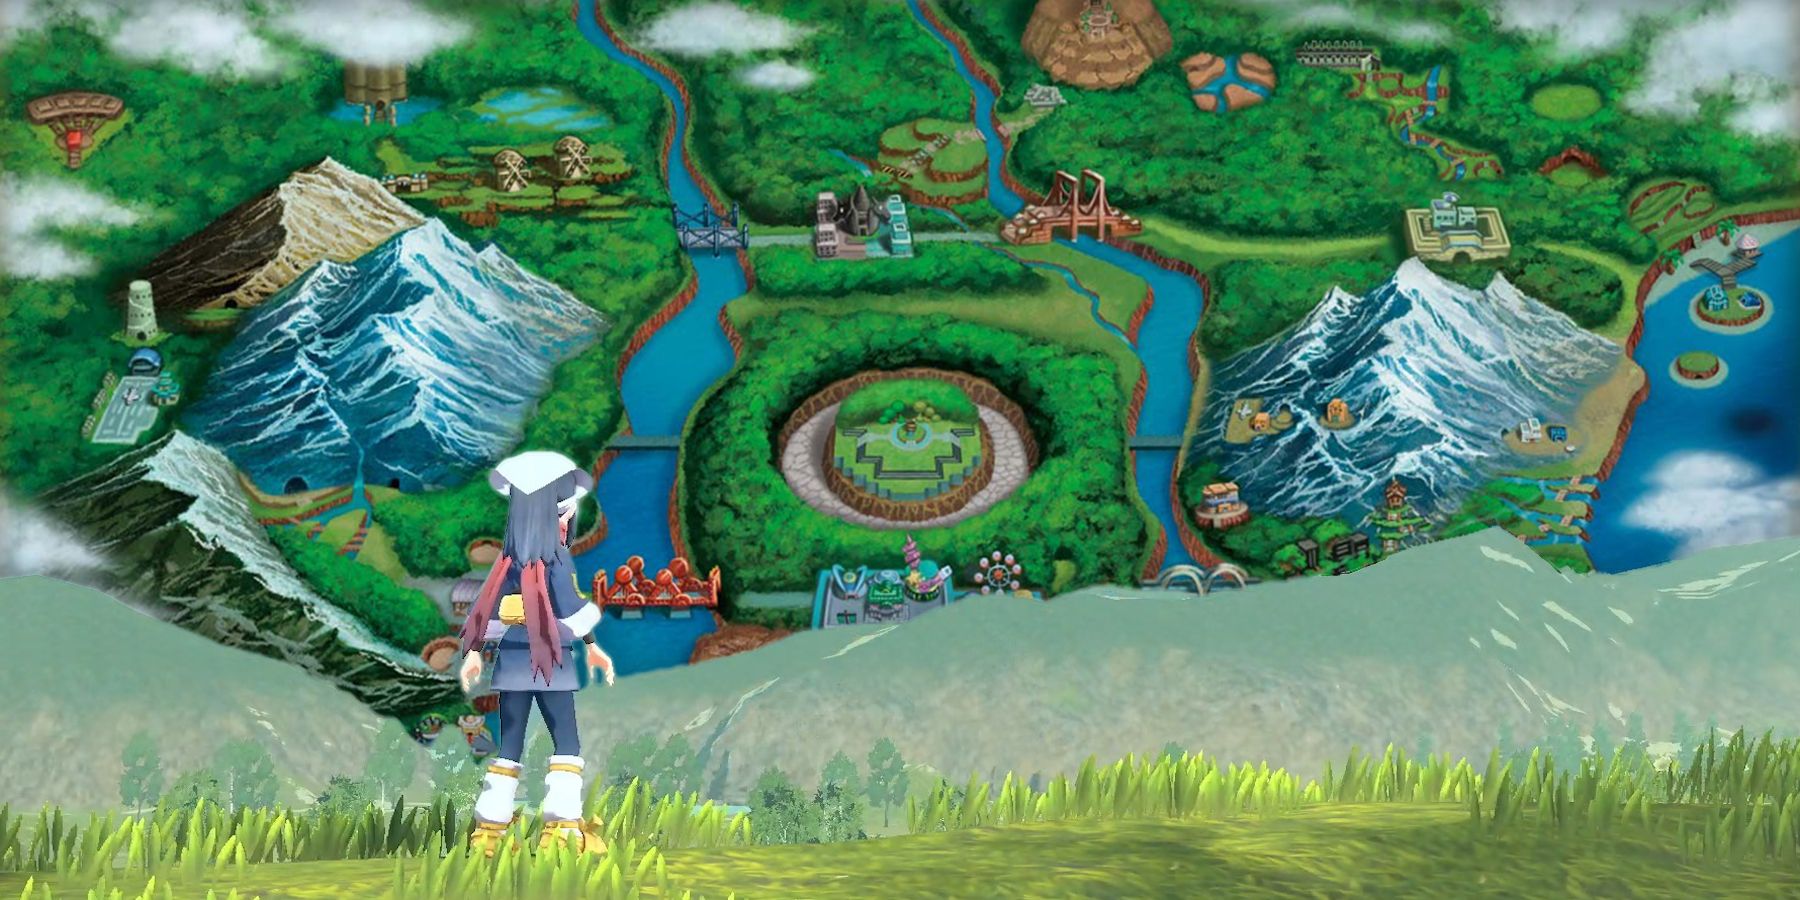 Pokemon Leakers Suggest Next Game Will Have Ties to Pokemon Black & White